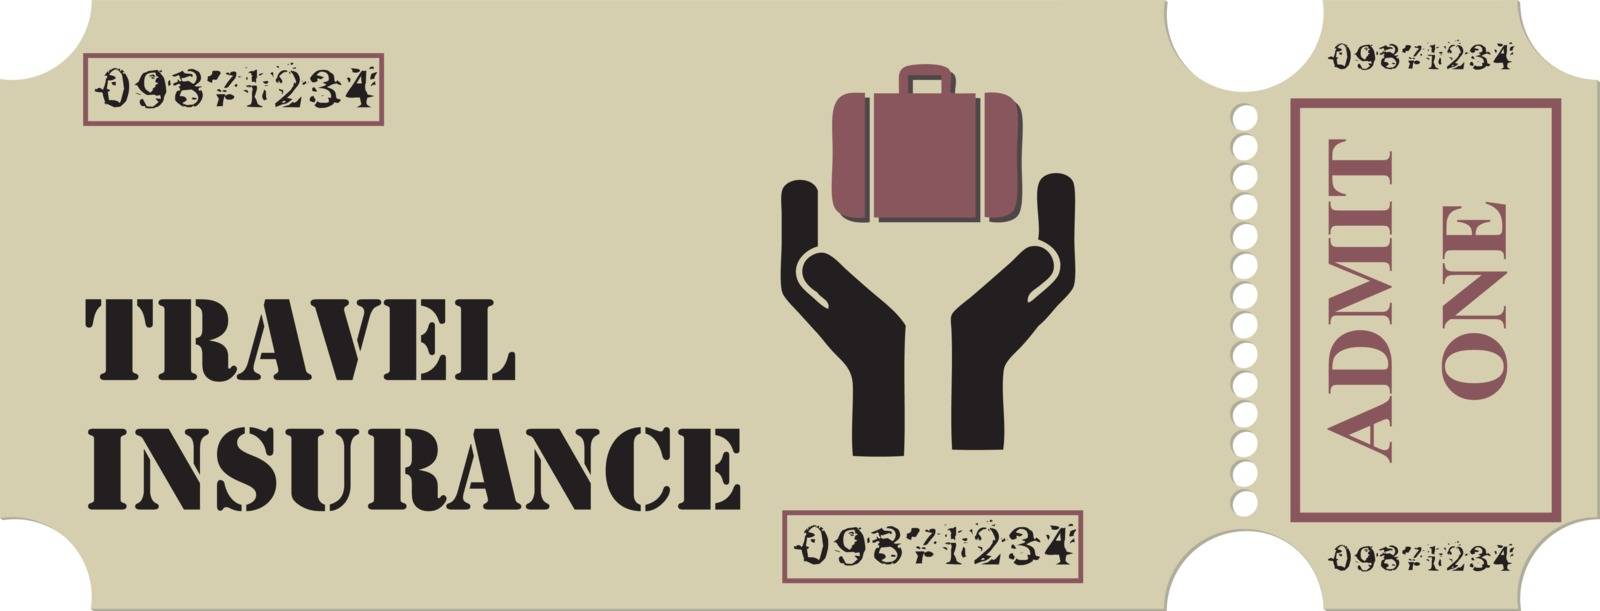 Ticket for travel insurance by VIPDesignUSA